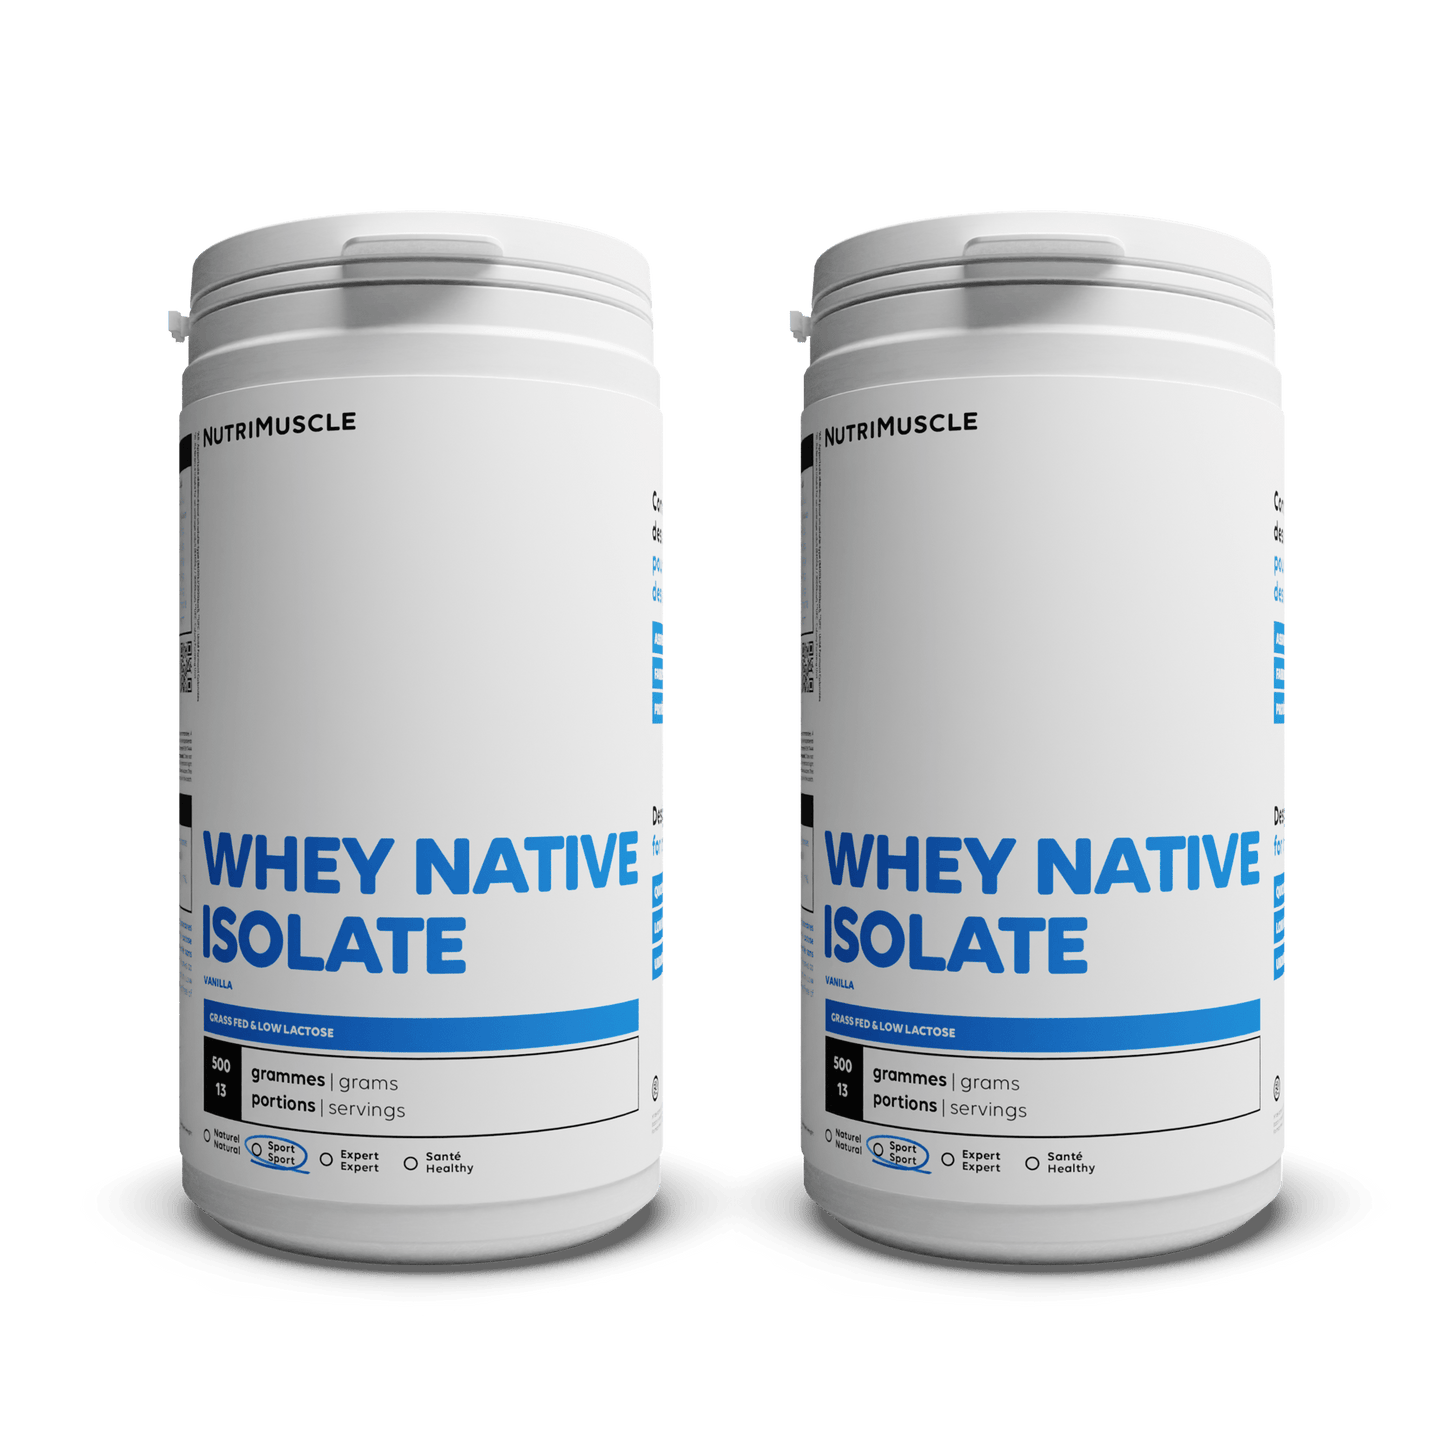 Nutrimuscle Protéines Vanille / 1.00 kg Whey Native Isolate (Low lactose)